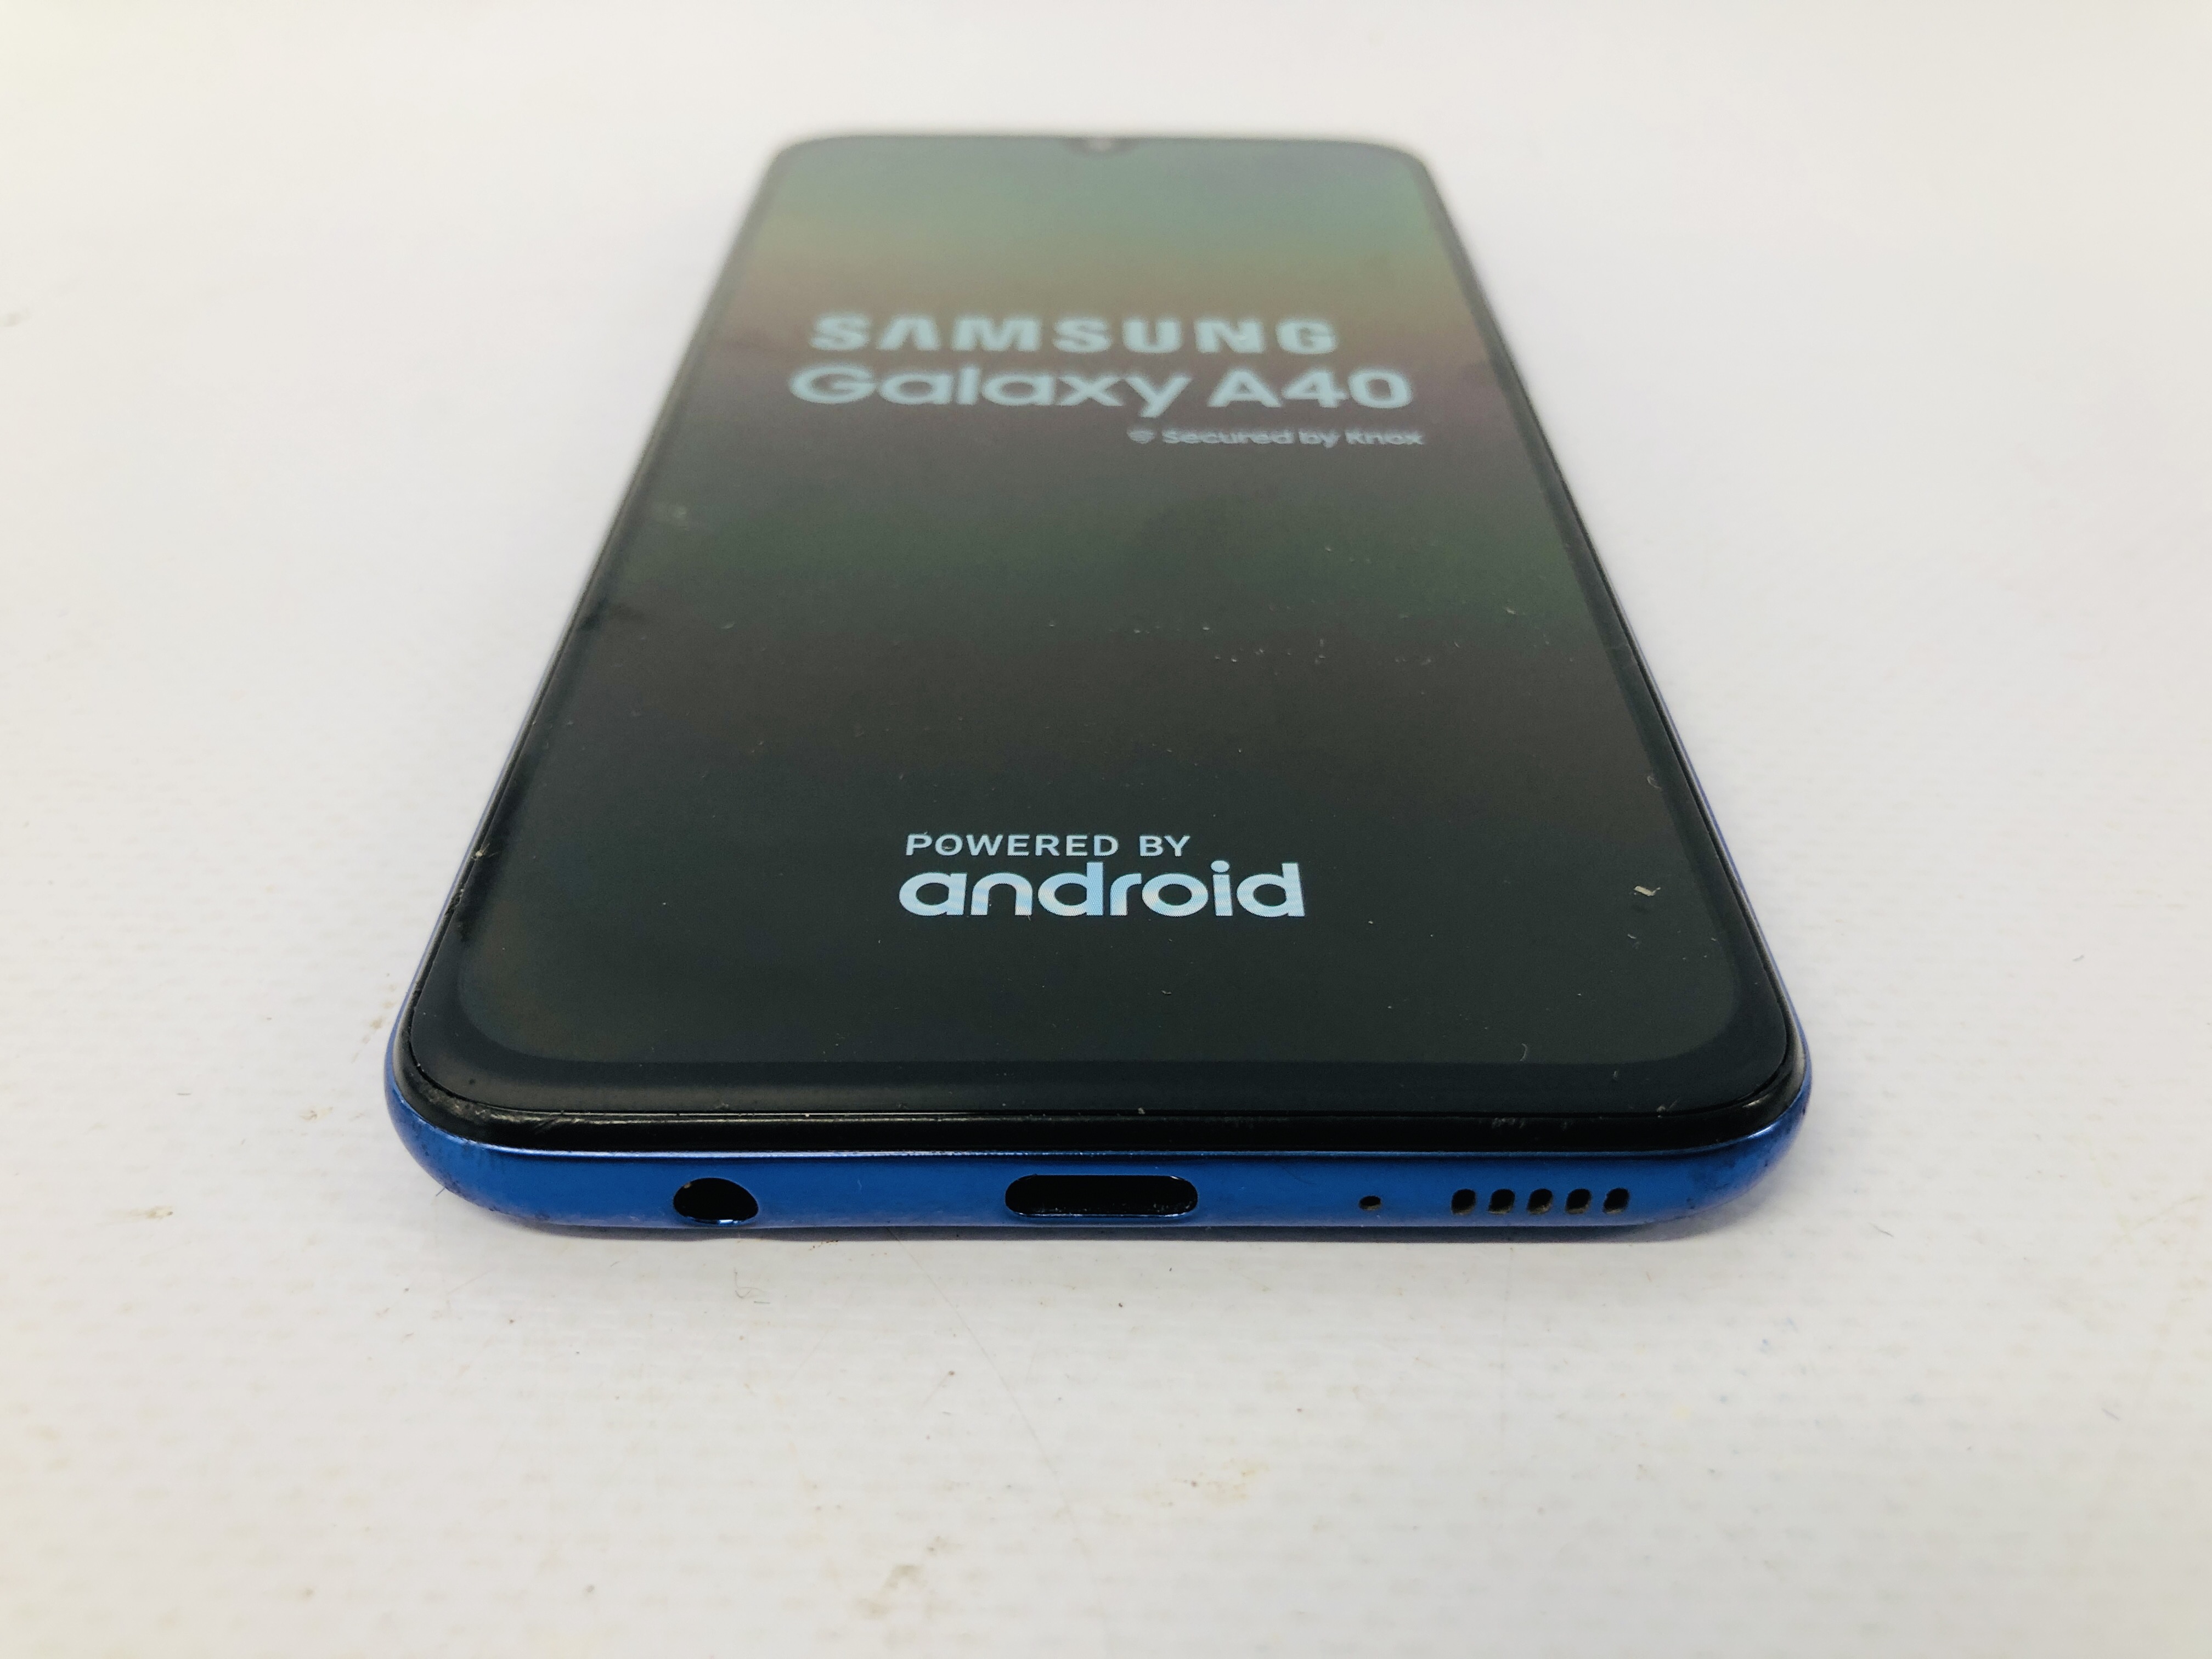 A SAMSUNG GALAXY A40 SMARTPHONE - SOLD AS SEEN - NO GUARANTEE OF CONNECTIVITY - Image 2 of 3